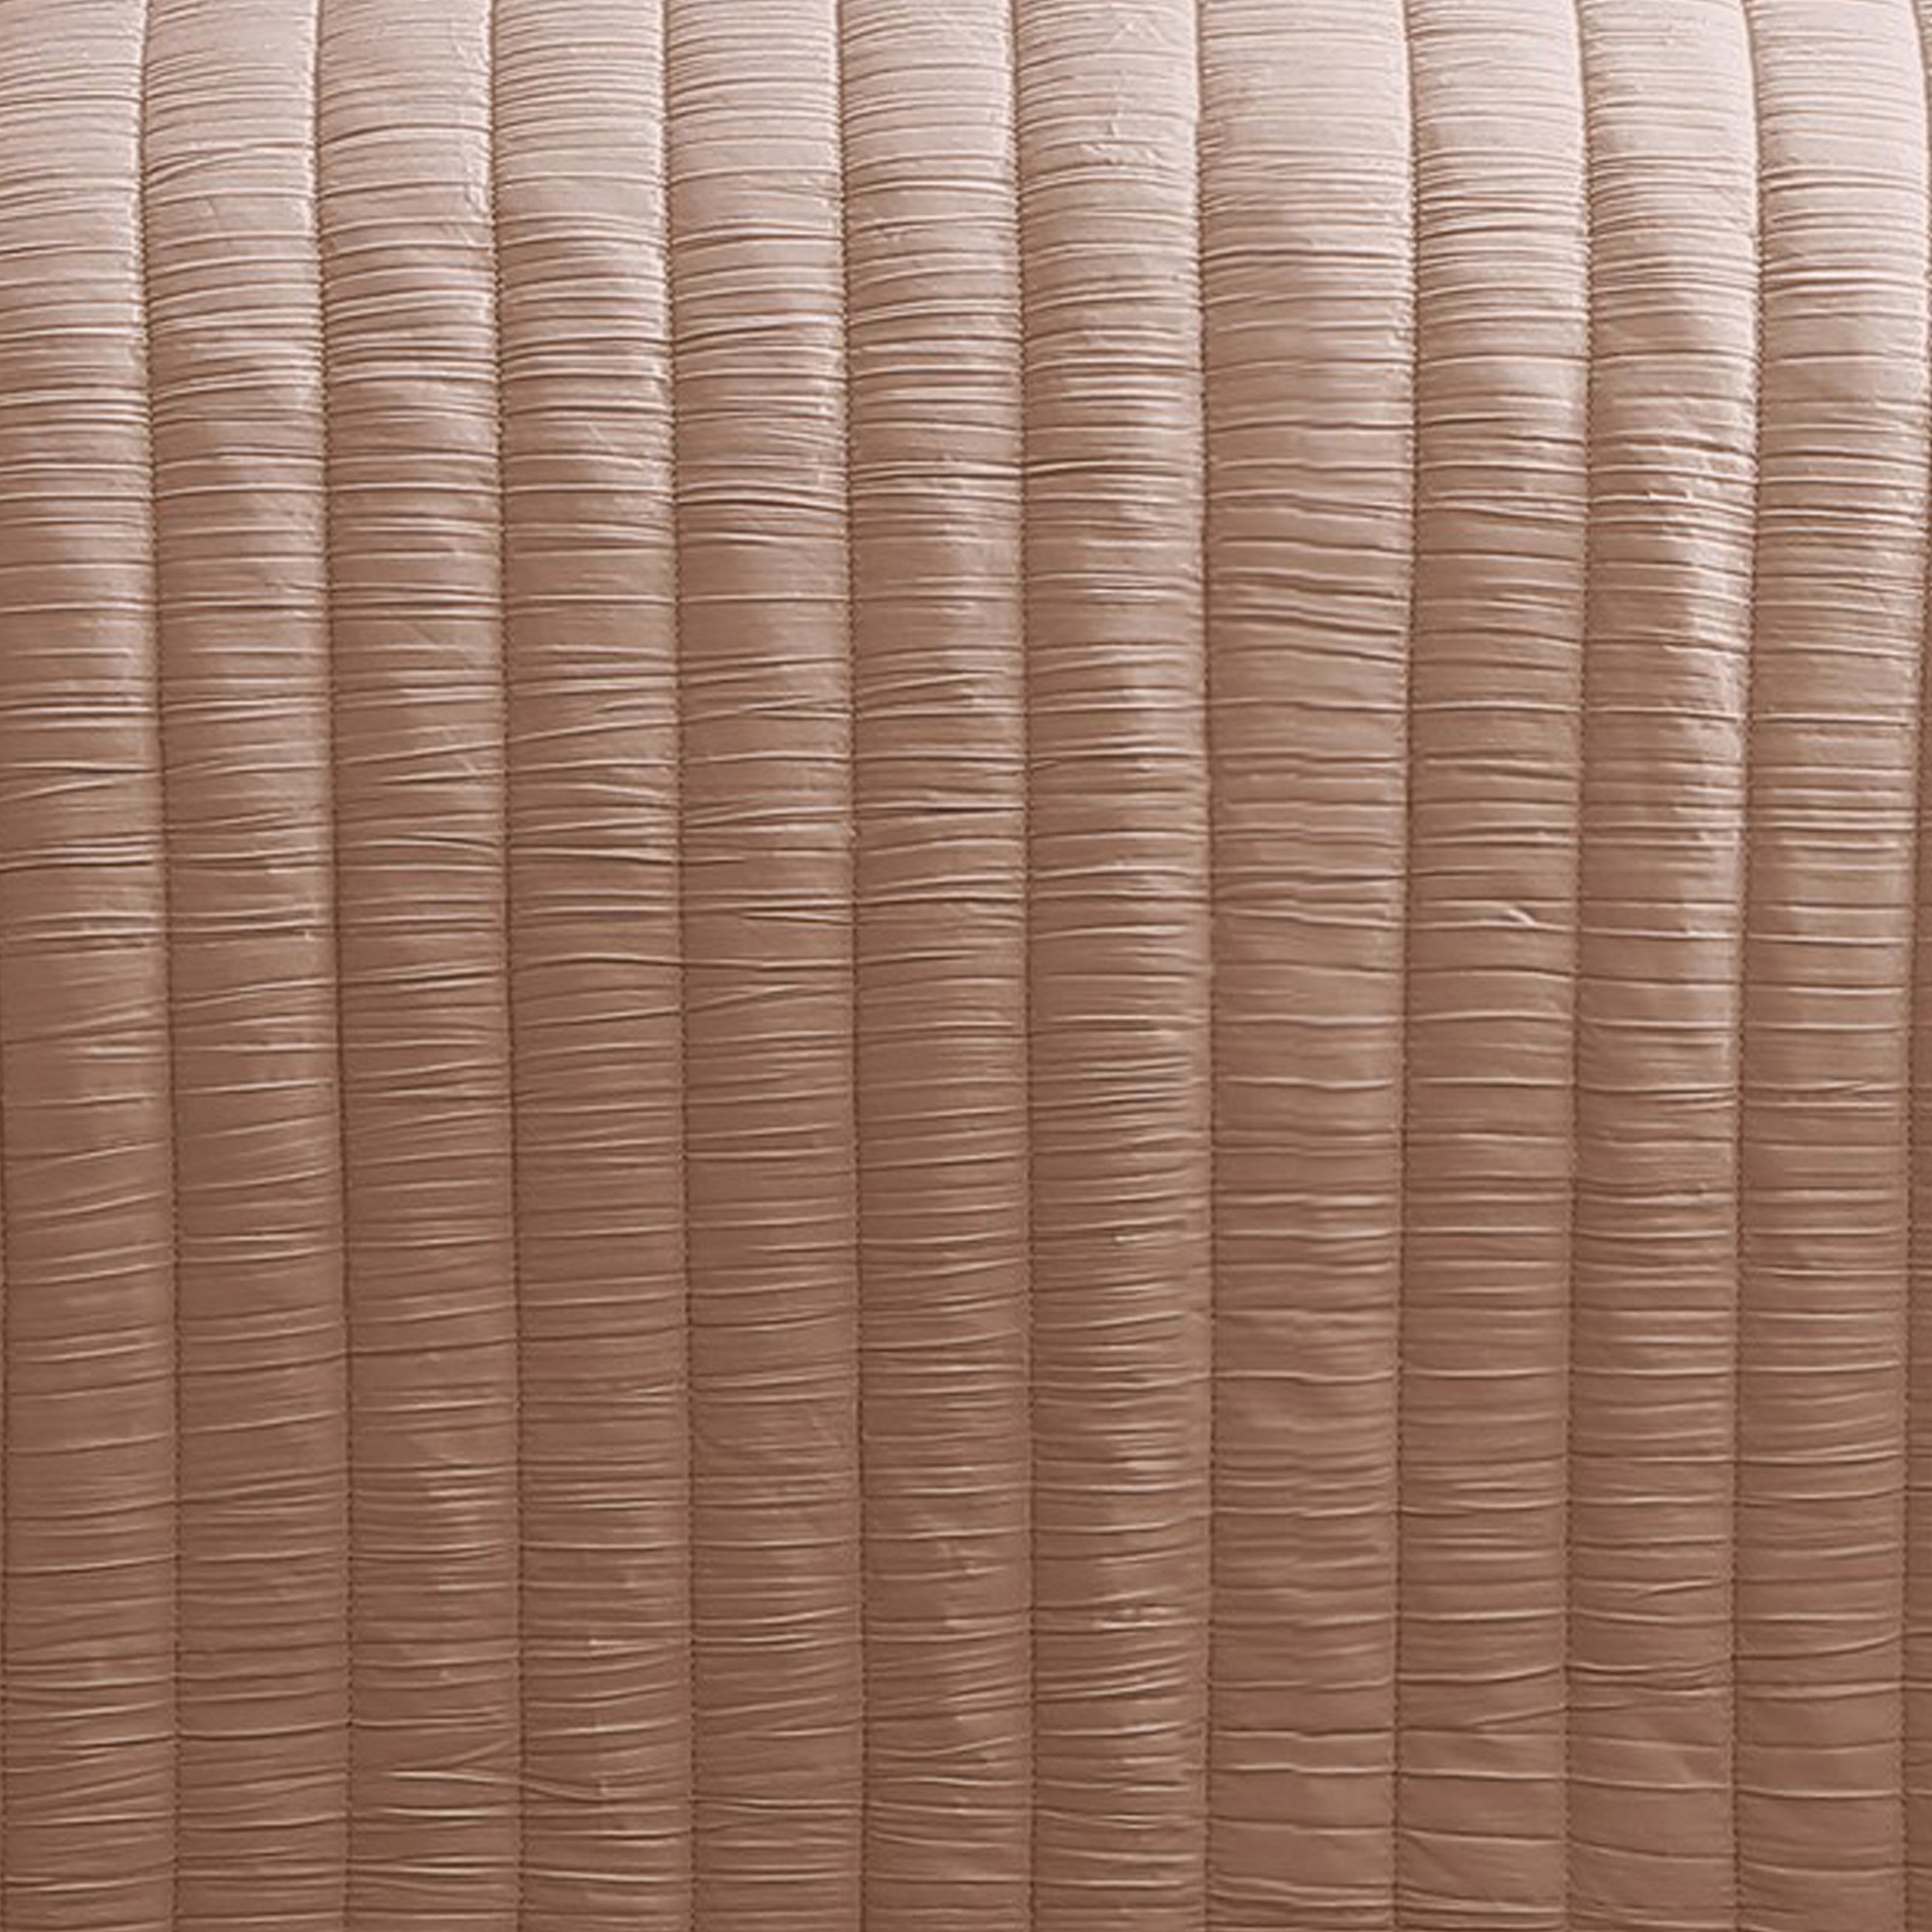 Elia Twin Contemporary Quilt Coverlet Set With Crinkle Texture, Blush Pink - Saltoro Sherpi